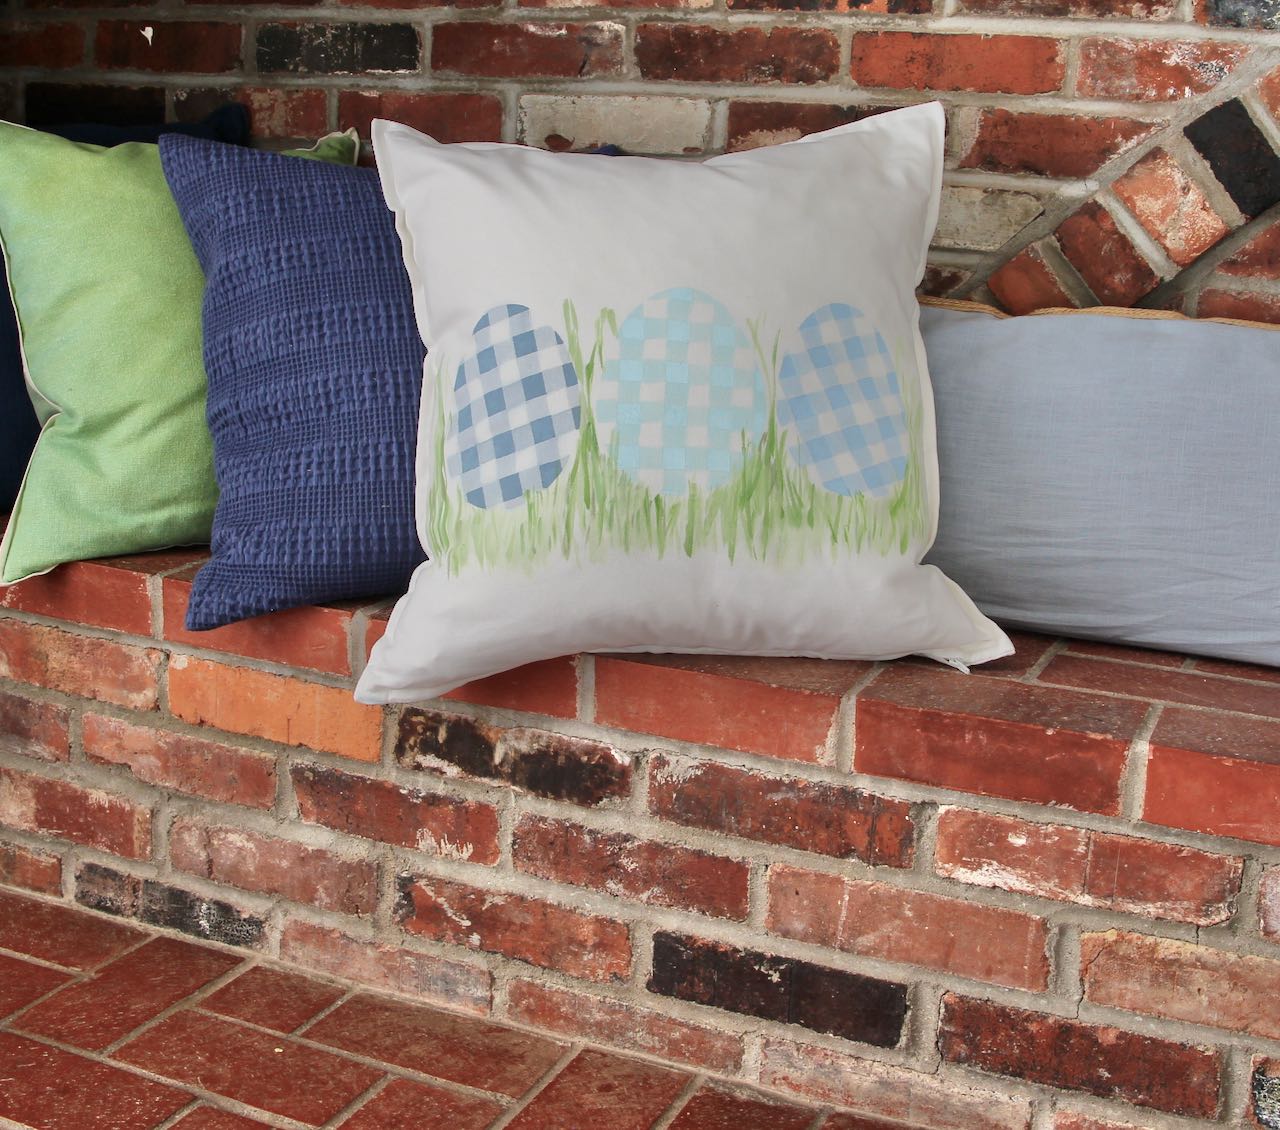 Finished painted pillow on a brick hearth sitting ledge with other solid pillows